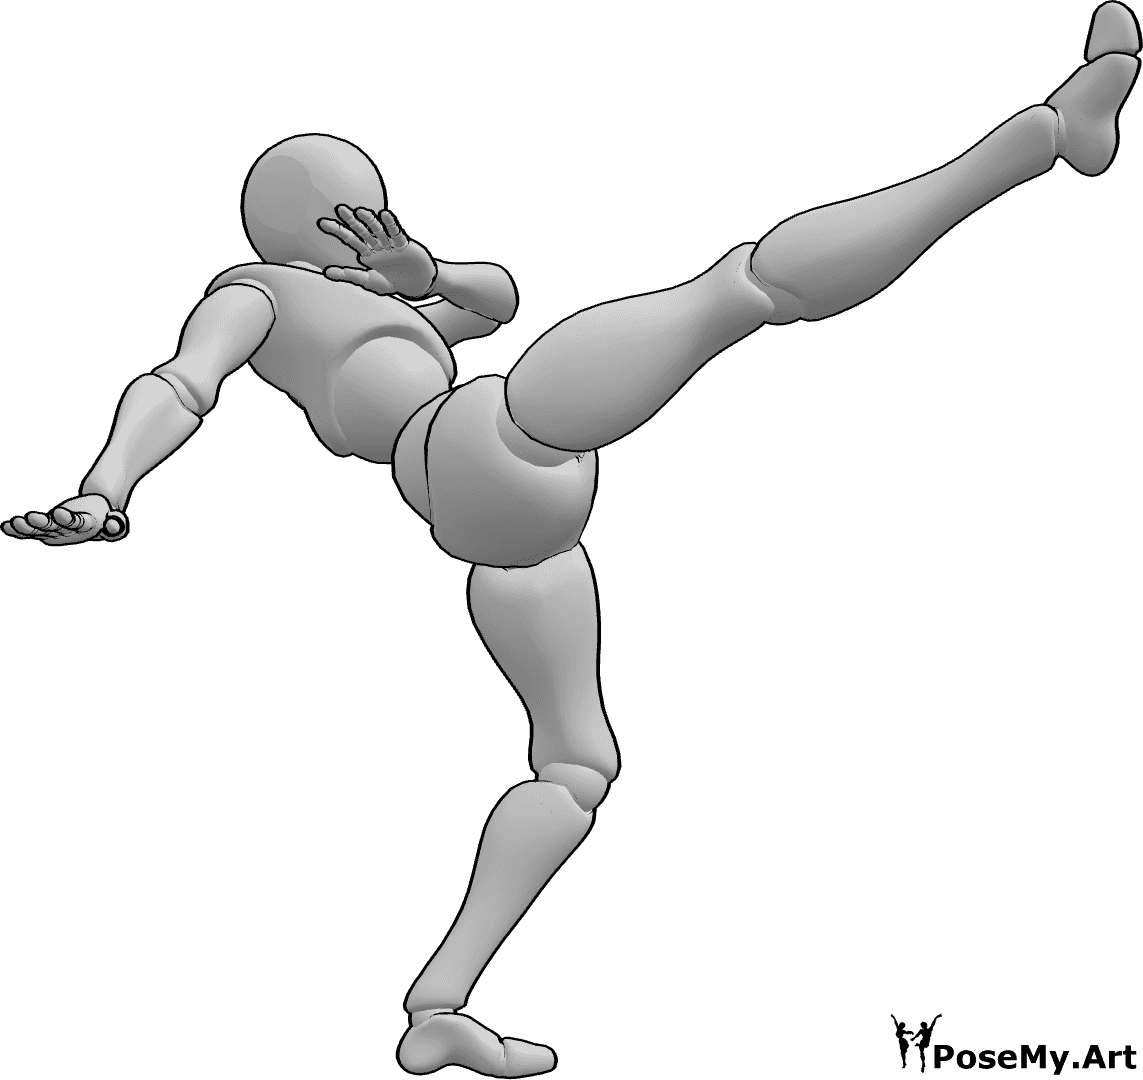 Pose Reference - Female capoeira kick pose - Female dynamic capoeira spinning high kick with right foot